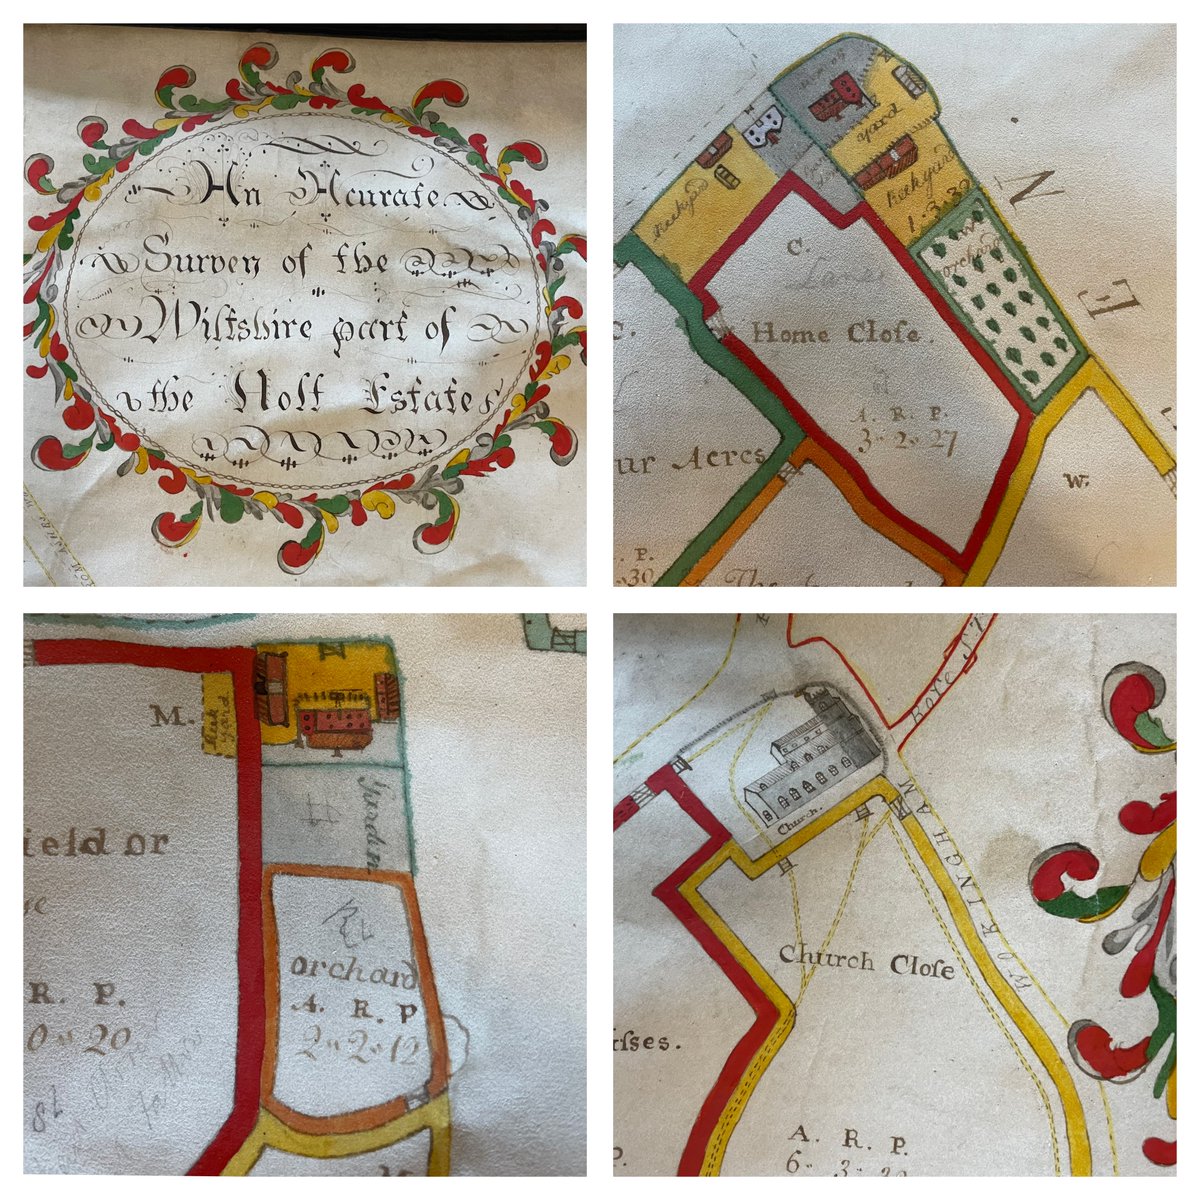 This colourful map was recently viewed #InTheSearchroom. It is a survey of the Holt estate, Wokingham, by John Smith (no date, late 18th century). We love the attention to detail including all the different buildings. #ColourfulArchives #Archive30